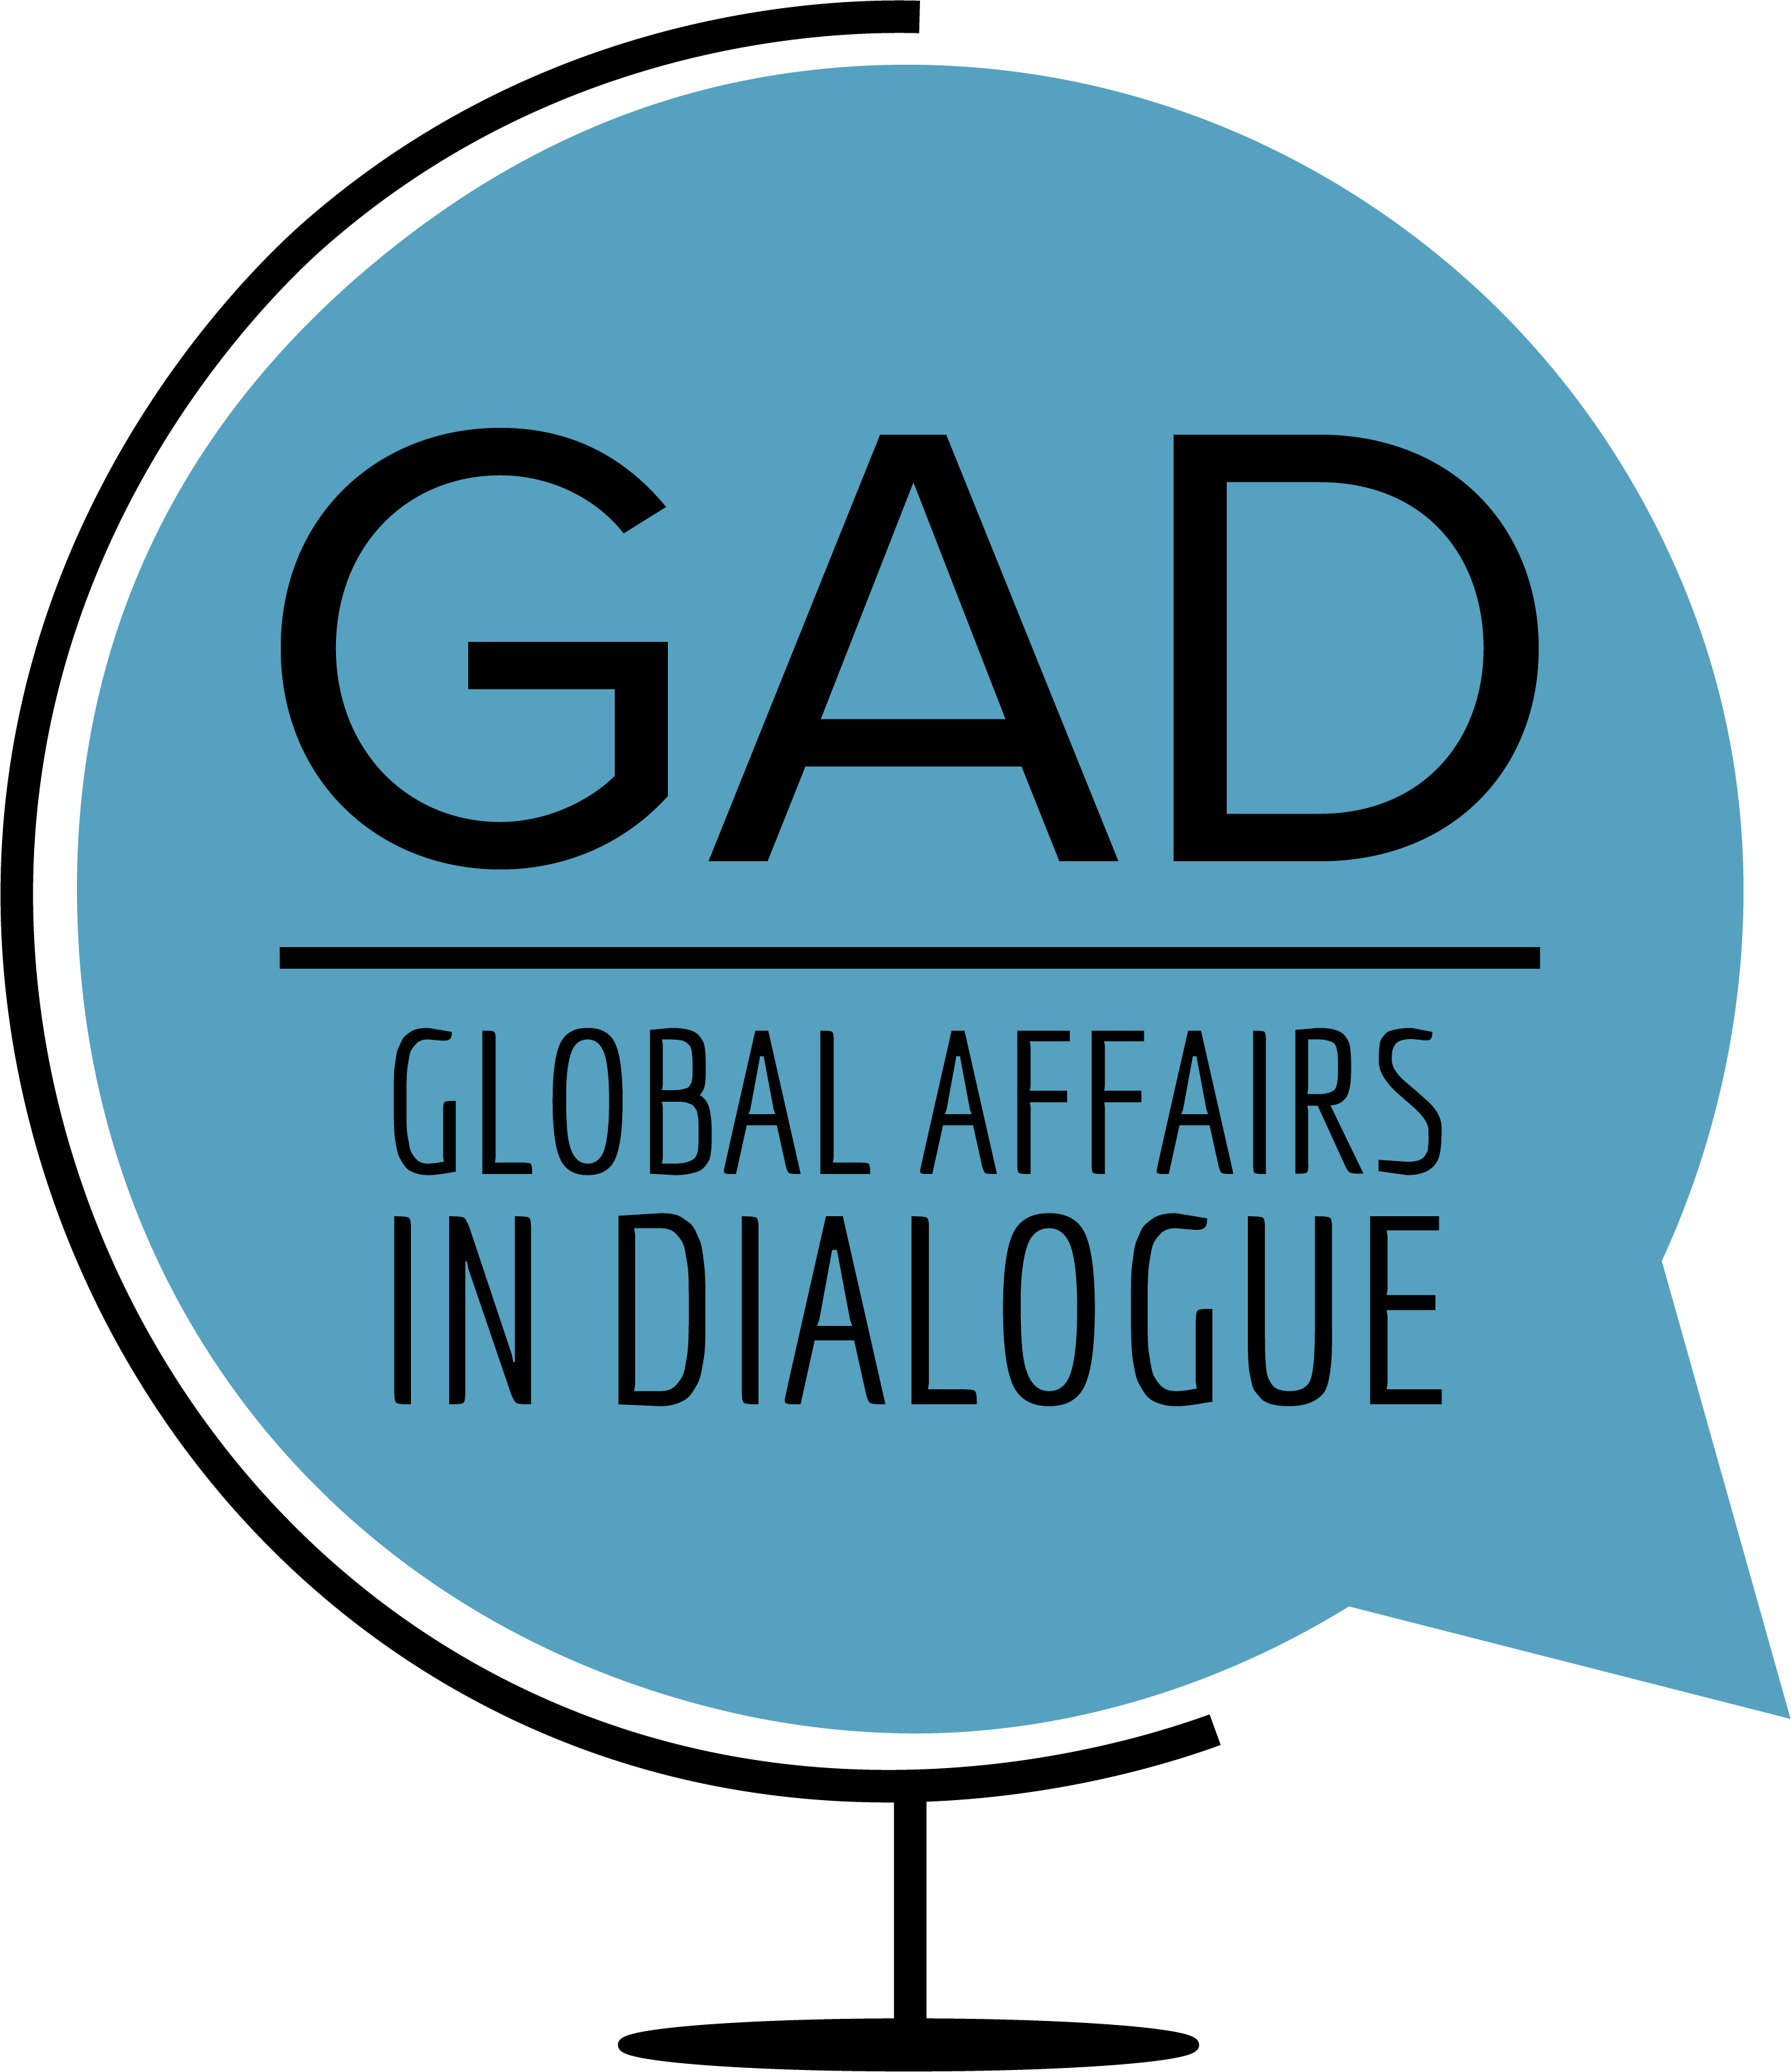 Global Affairs in Dialogue